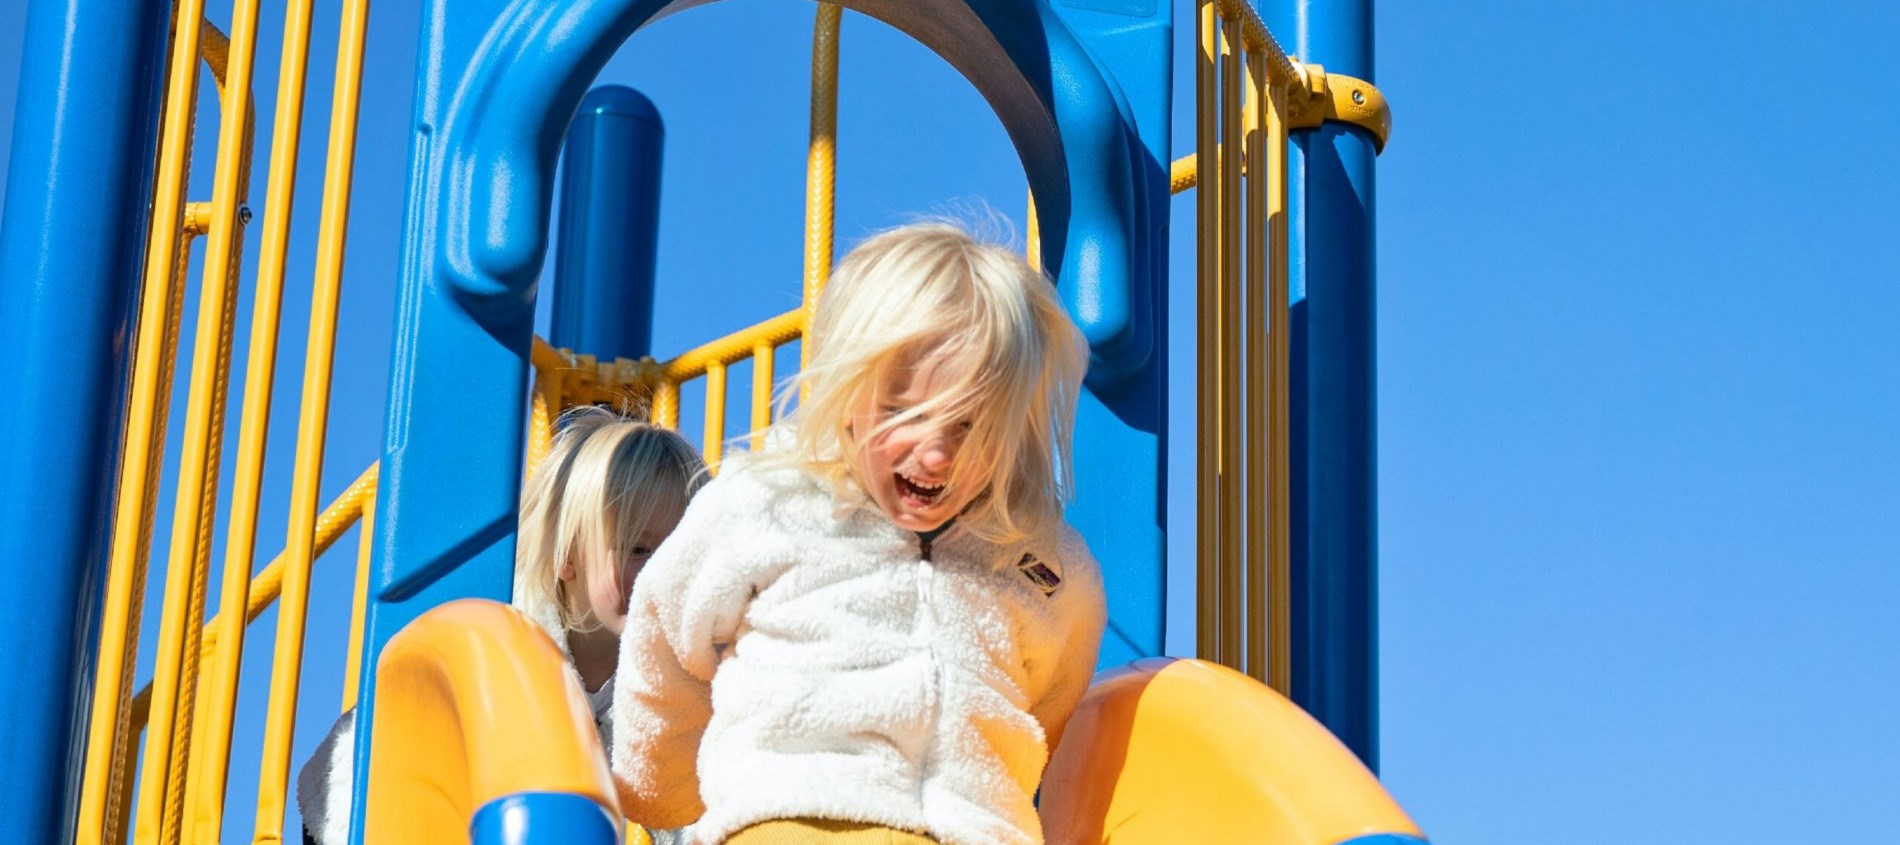 Two girls going down a playground slide